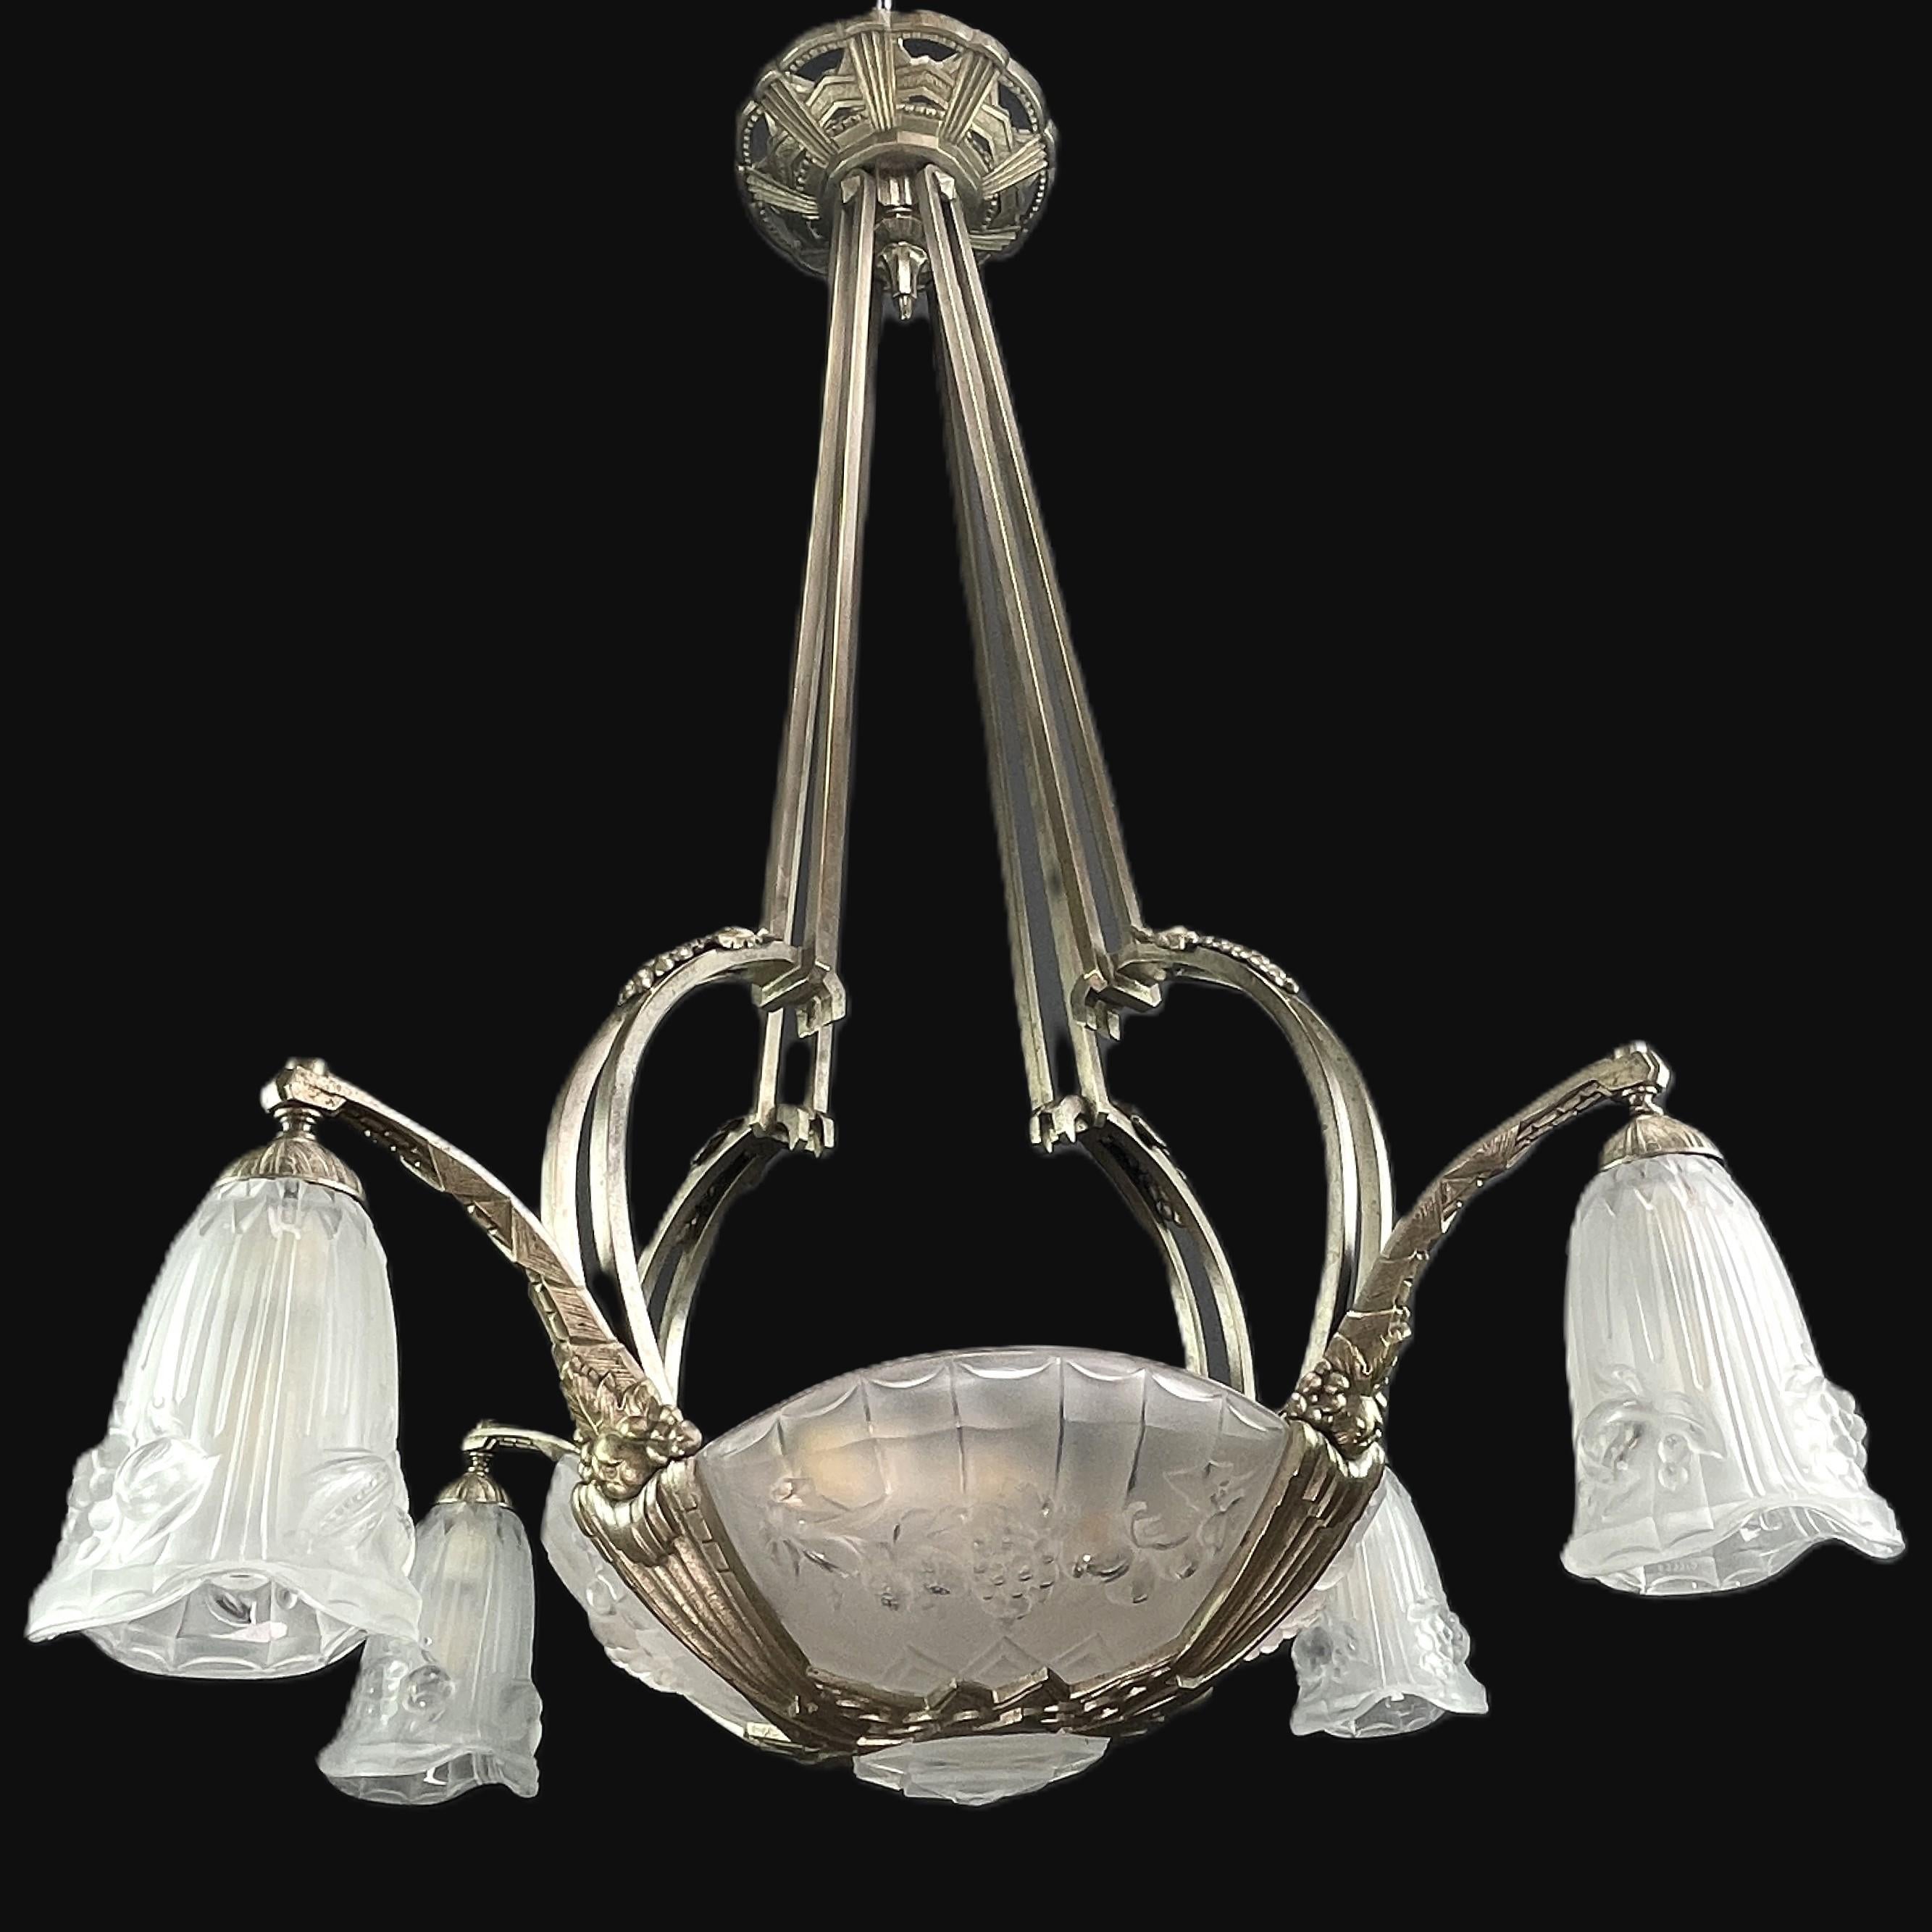 Art Deco Chandelier by P. Gilles France

This stunning Art Deco chandelier from the 1920s is an outstanding example of the elegance and sophistication of the Art Deco style. With its combination of nickel-plated bronze and glass, this chandelier